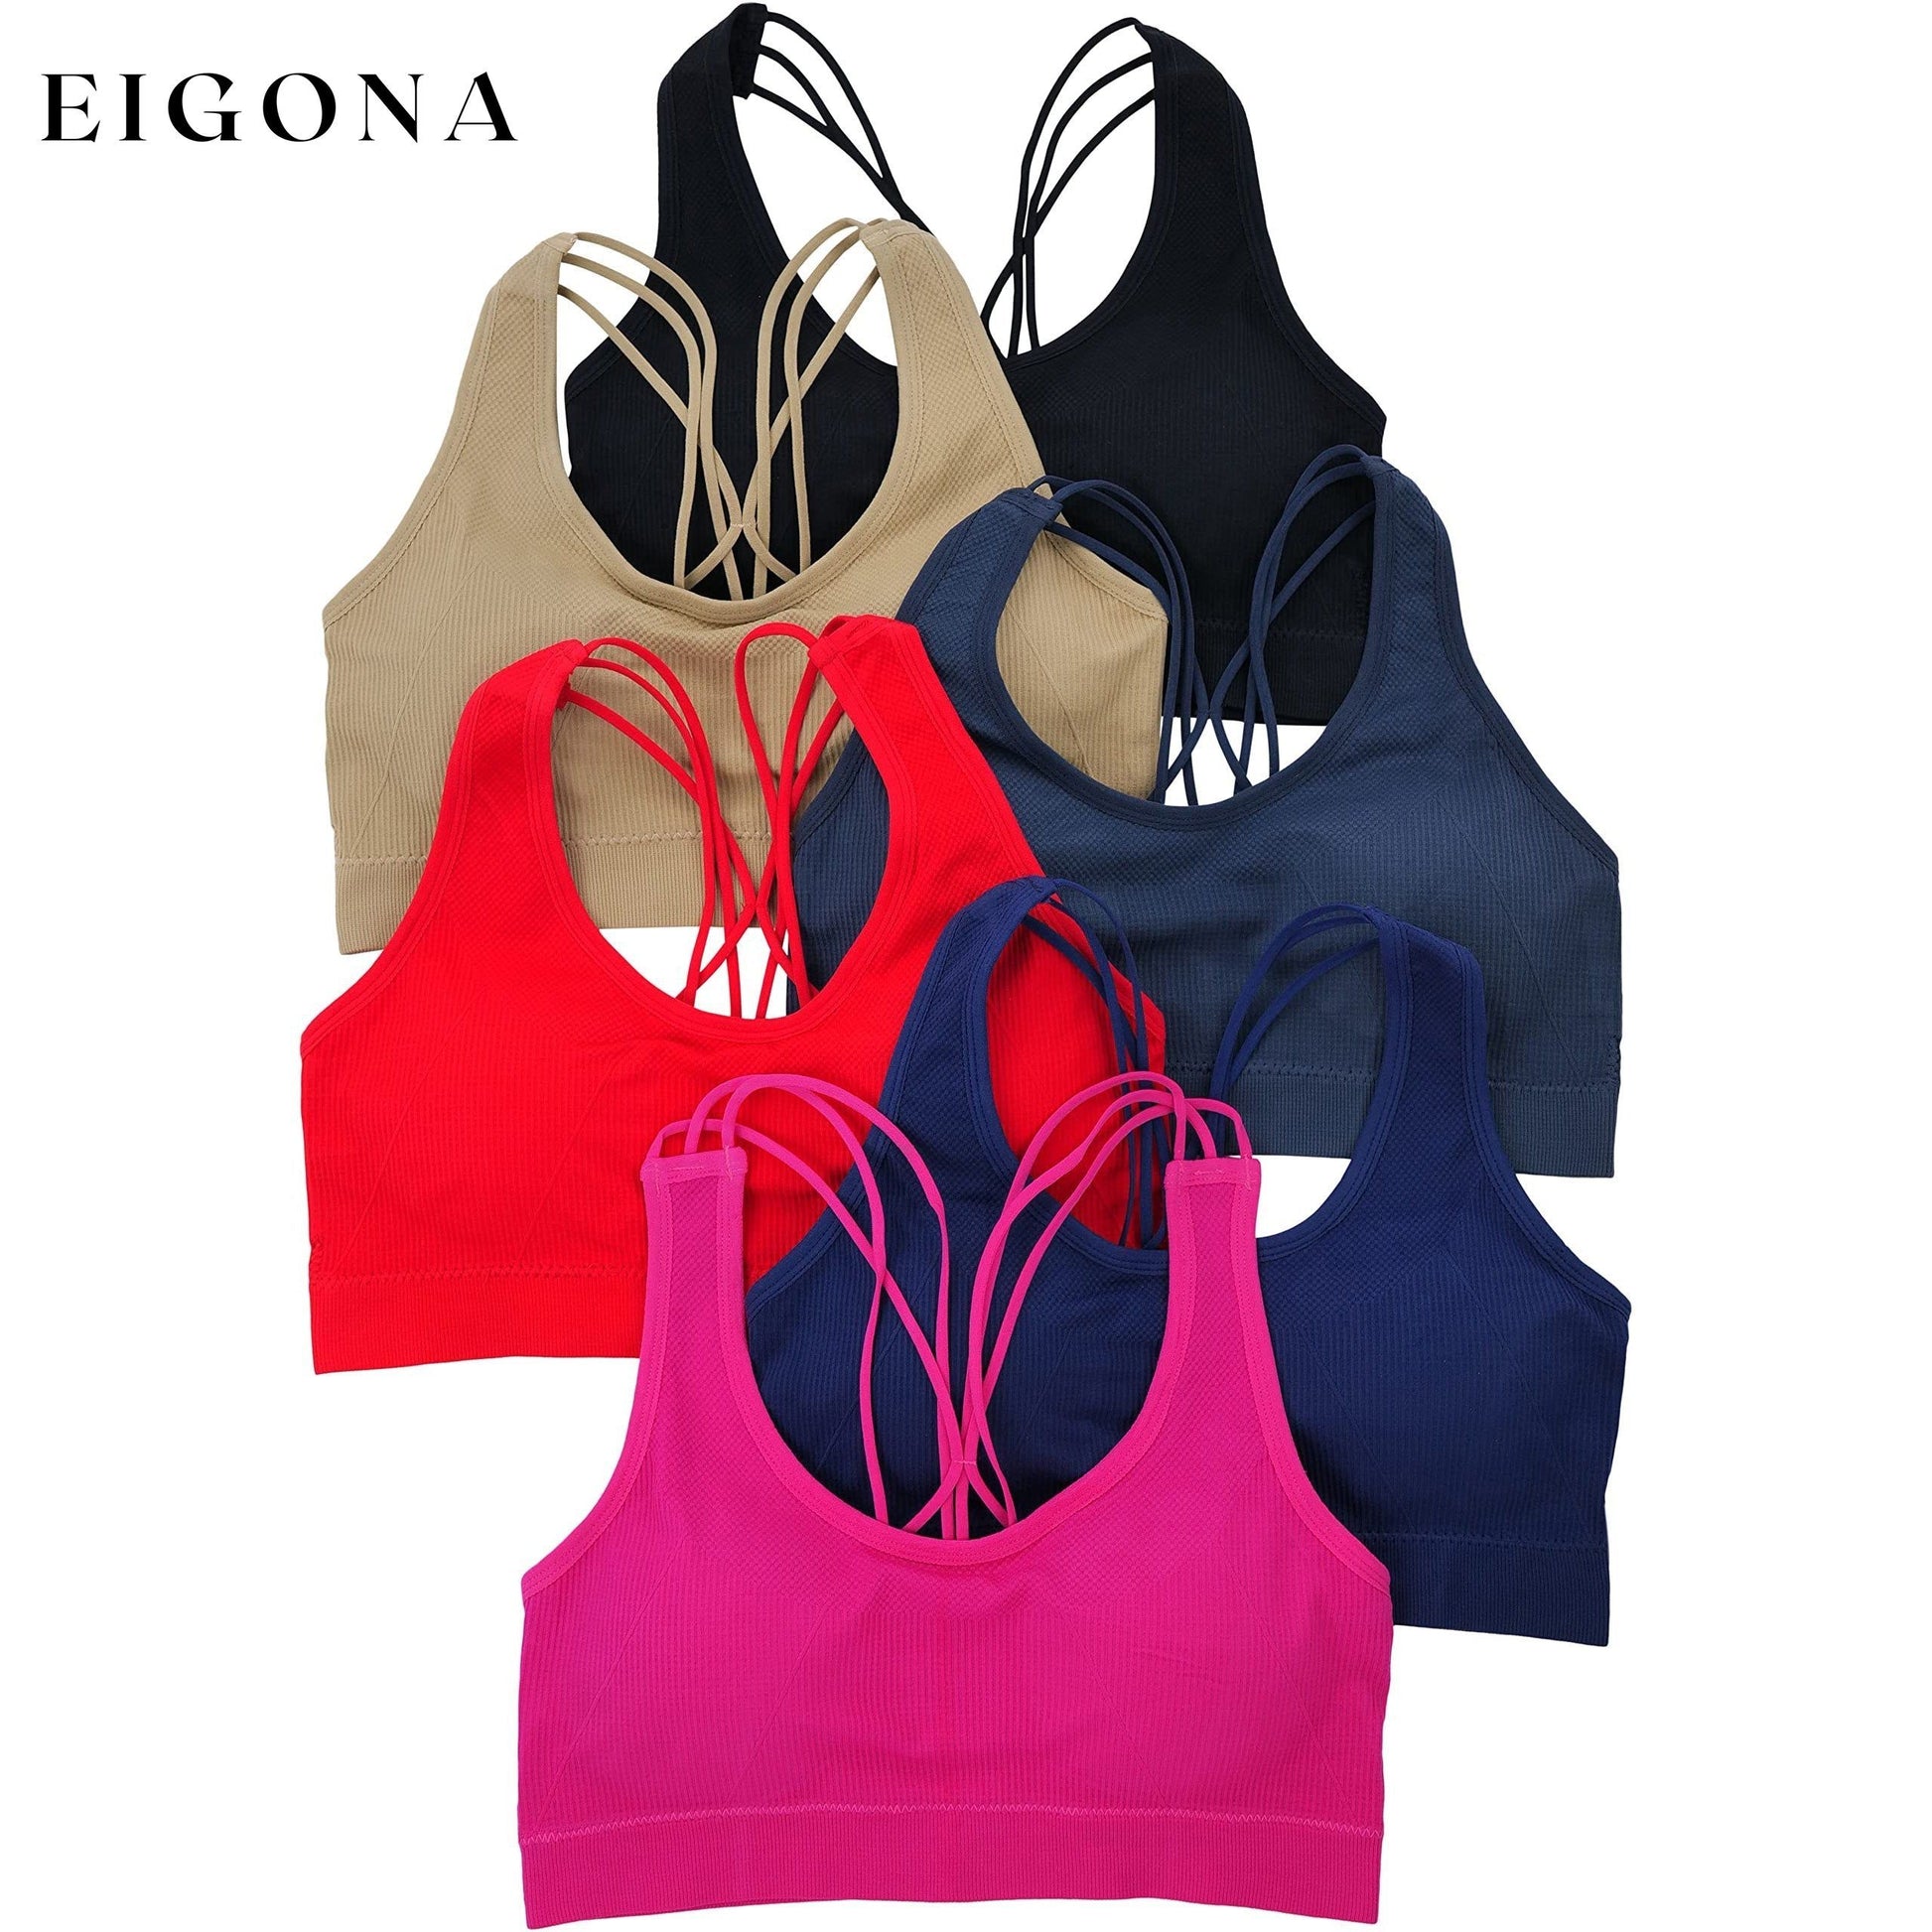 6-Pack: Women's Tank Front with Strappy Back Wire Free Sport Bralettes __stock:100 lingerie refund_fee:1200